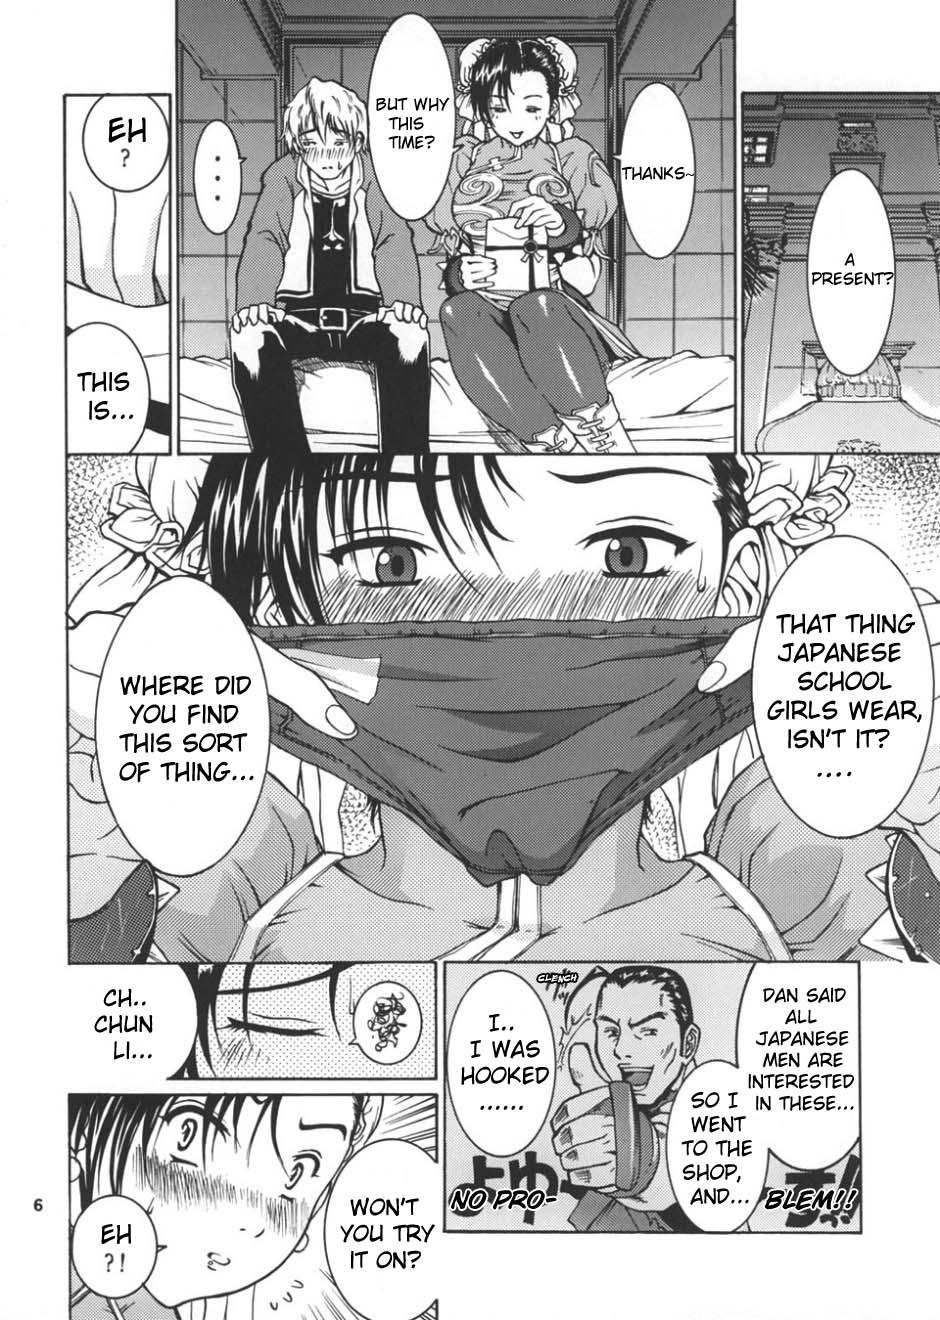 Massage Creep Youshu Tamago Tei Vol. 1 - Street fighter Eating - Page 5